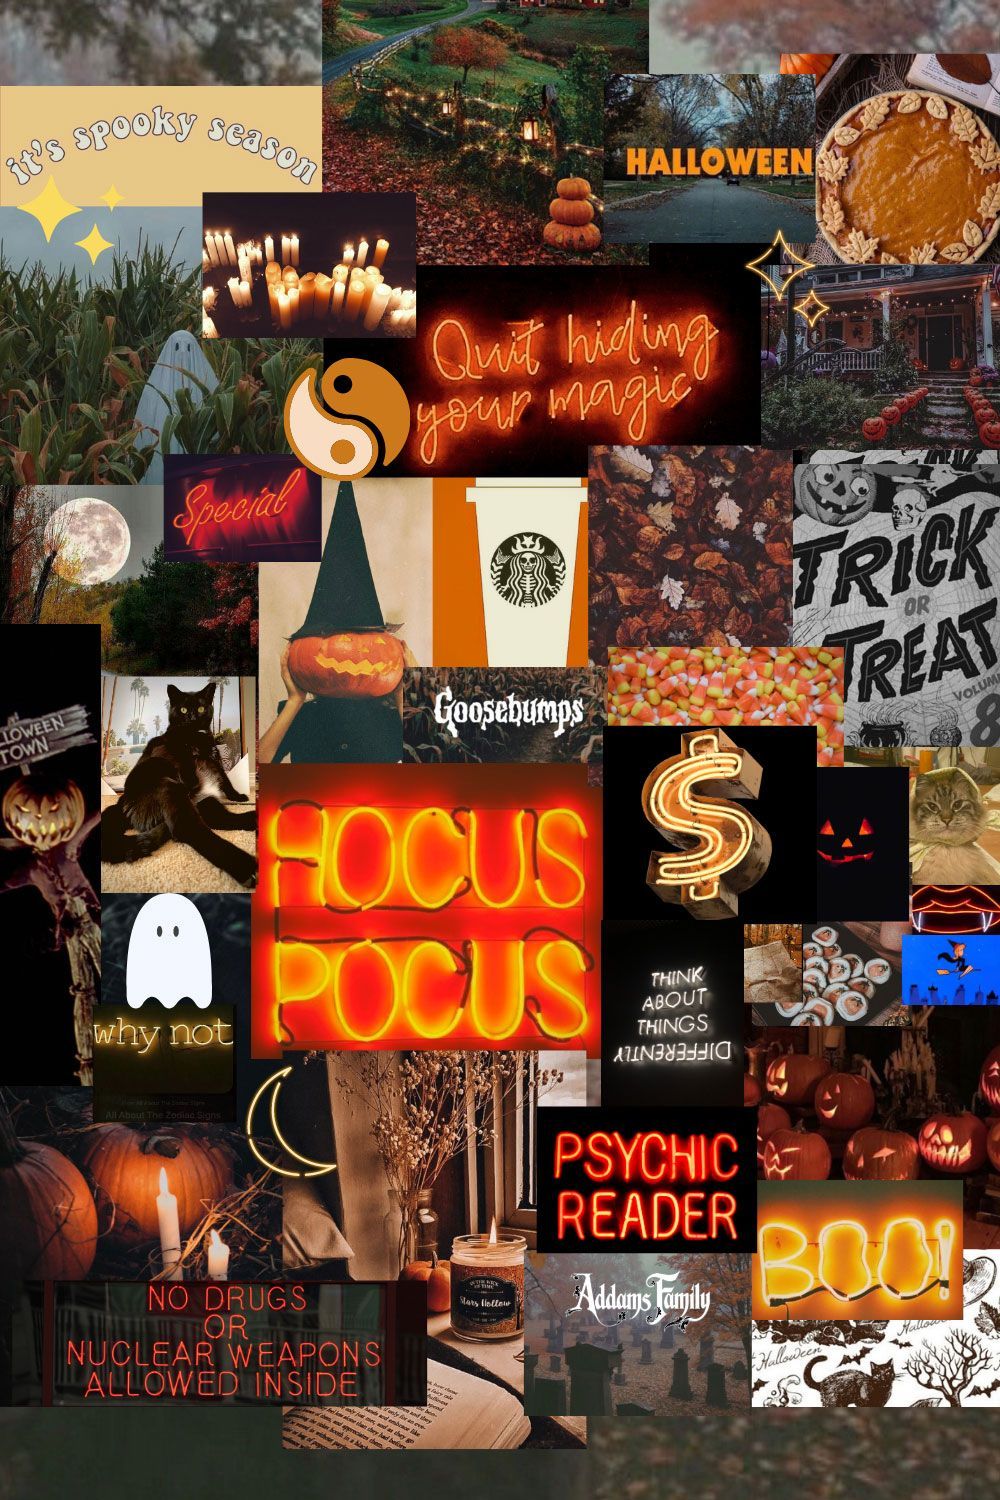 A collage of Halloween images including pumpkins, a ghost, and coffee. - Cute Halloween, October, November, spooky, Halloween, magic